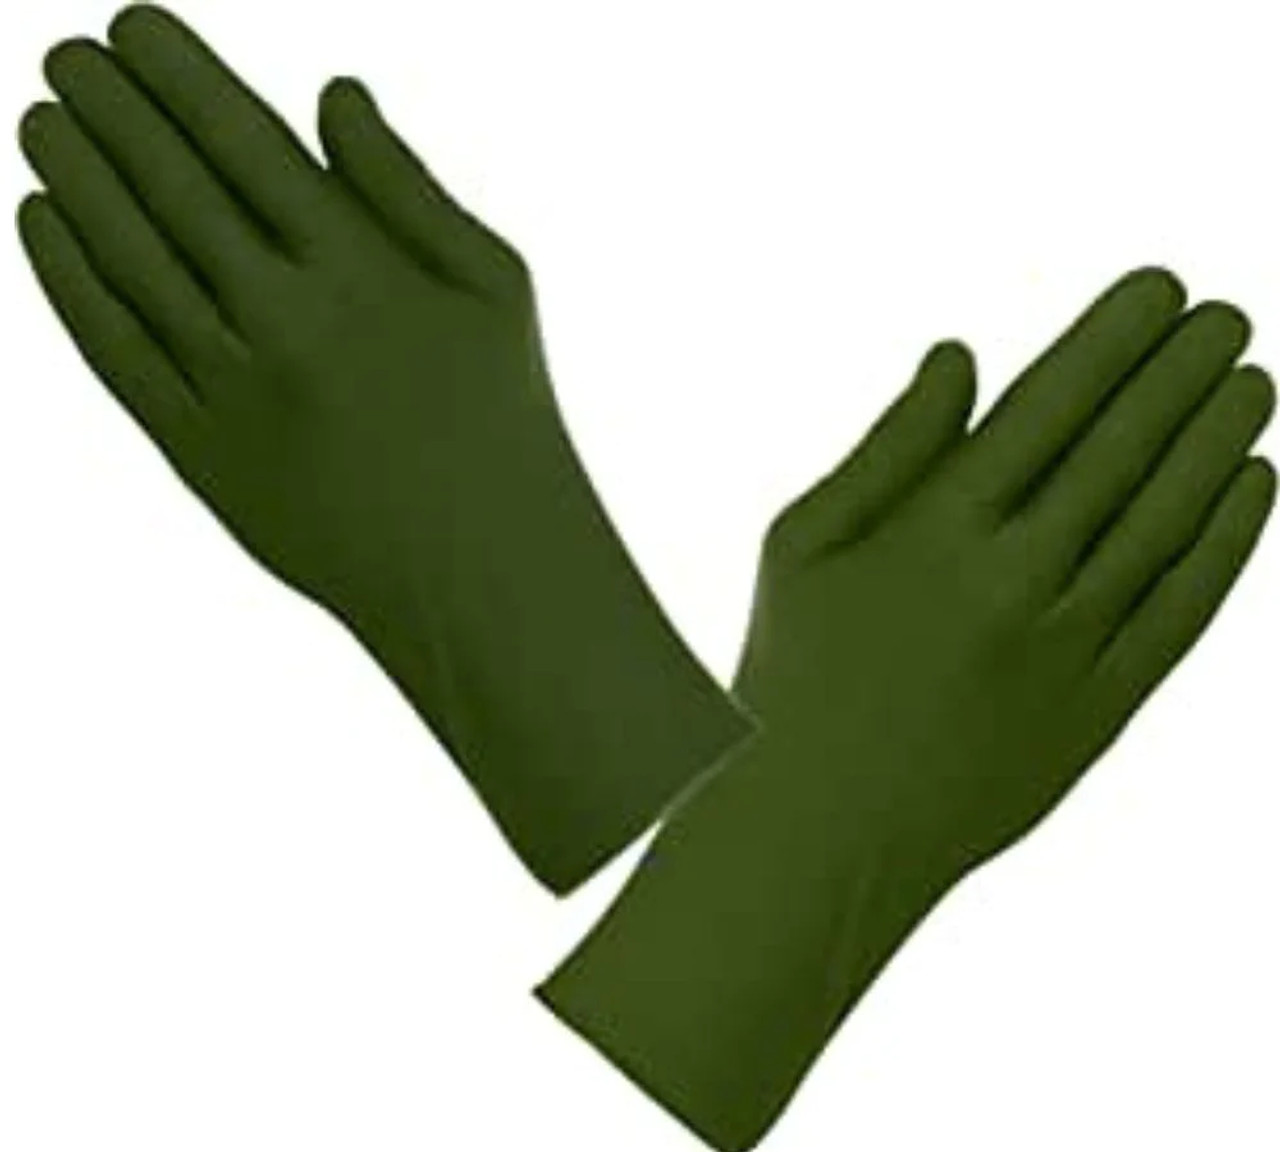 Rynoskin OSFM Gloves with UV & Insect Bite Protection, Green